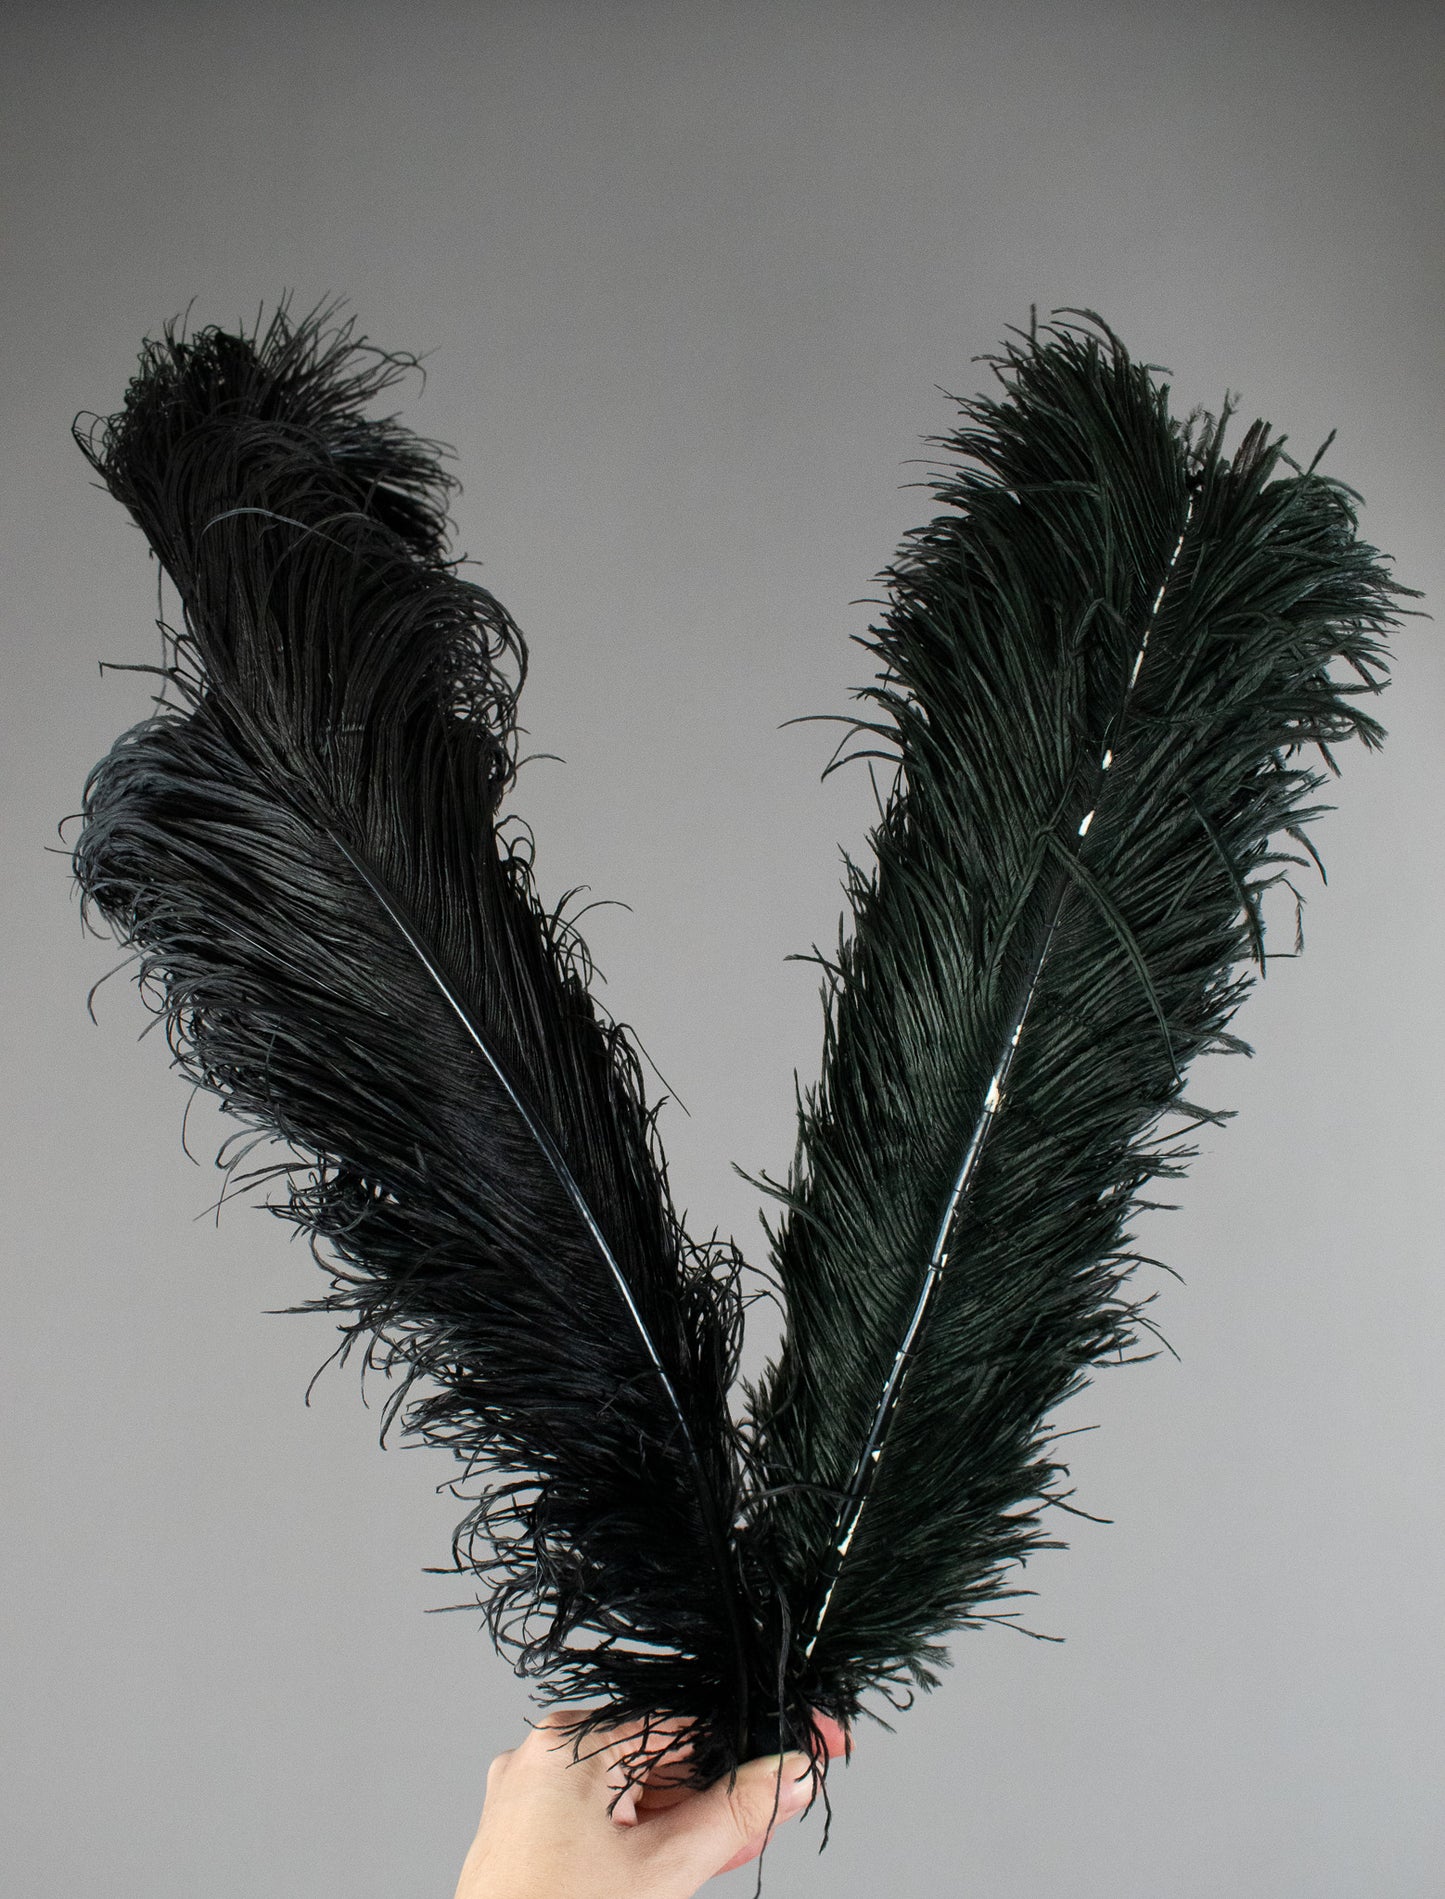 2 Extra Large Victorian Antique Black Ostrich Feathers in Original Packaging